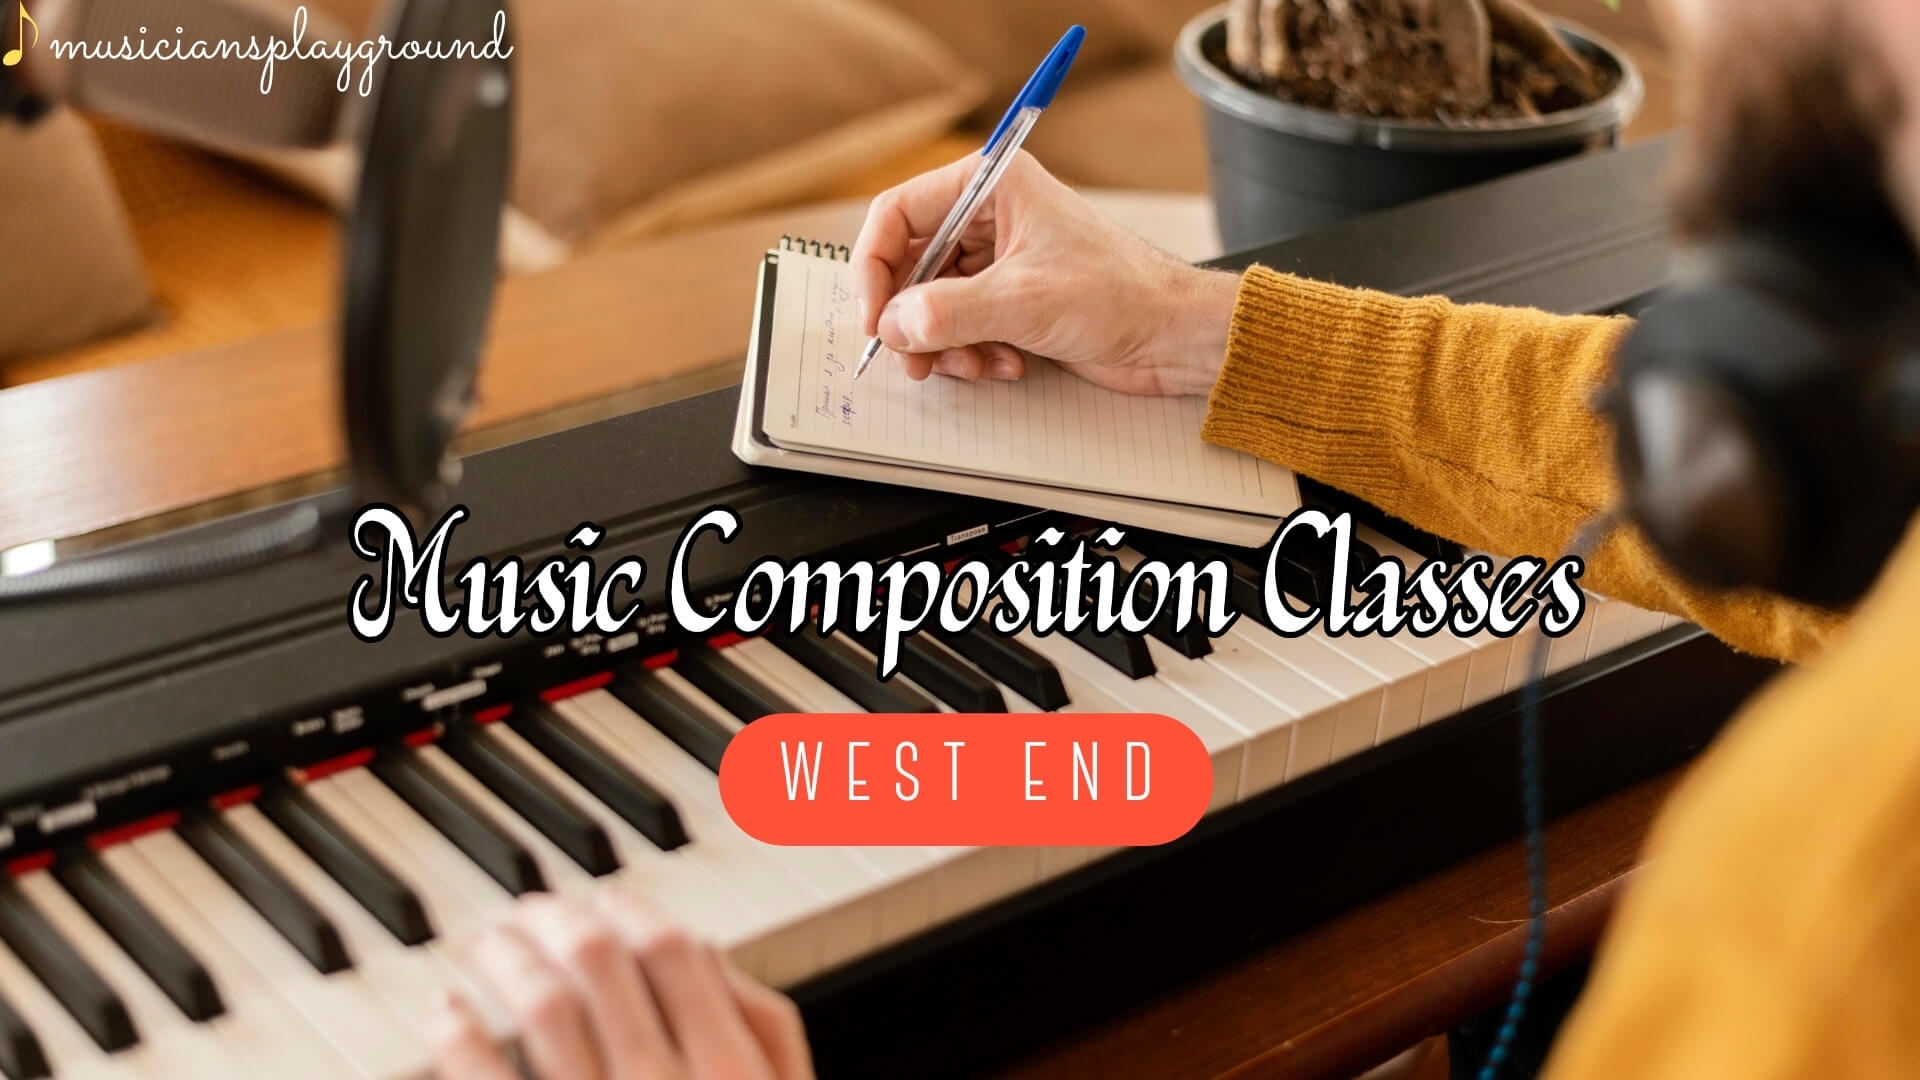 Music Composition Classes in West End, Massachusetts: Unlock Your Musical Potential at Musicians Playground